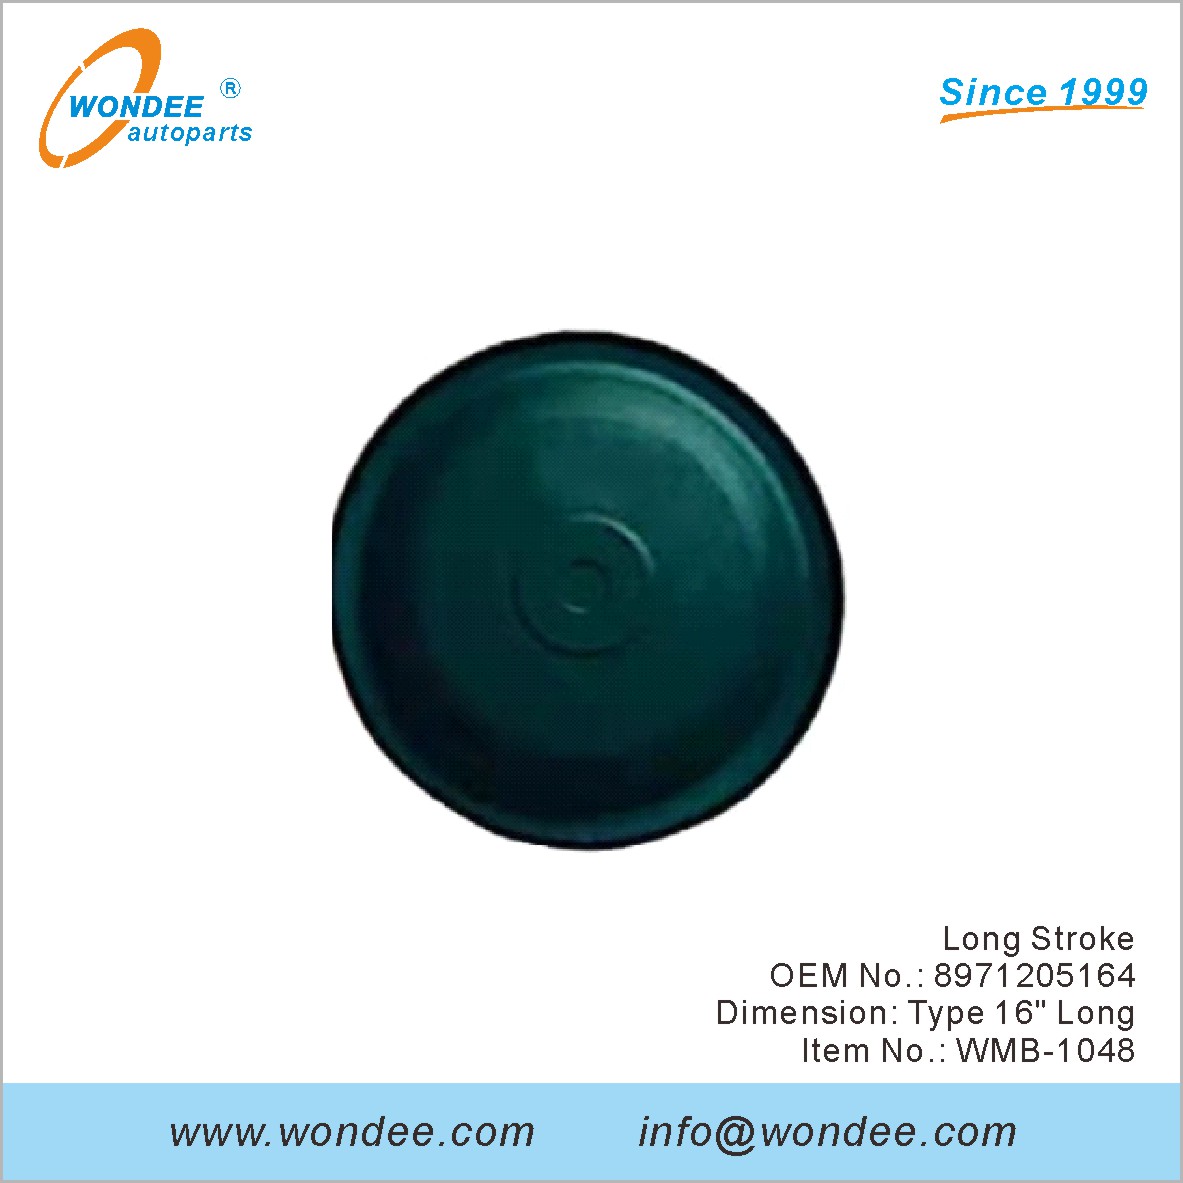 Long Stroke OEM 8971205164 for Benz from WONDEE